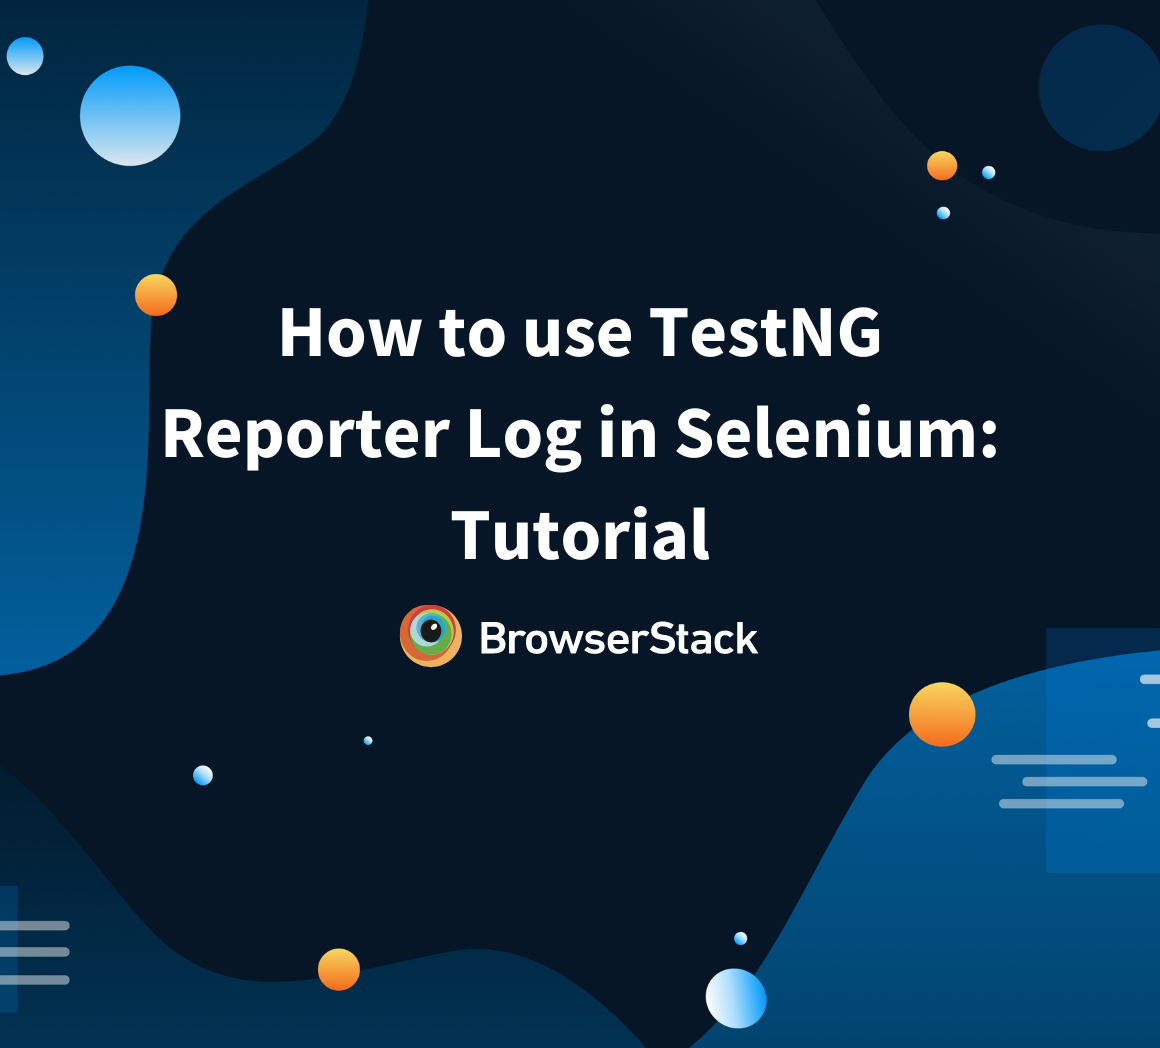 How to use TestNG Reporter Log in Selenium: Tutorial